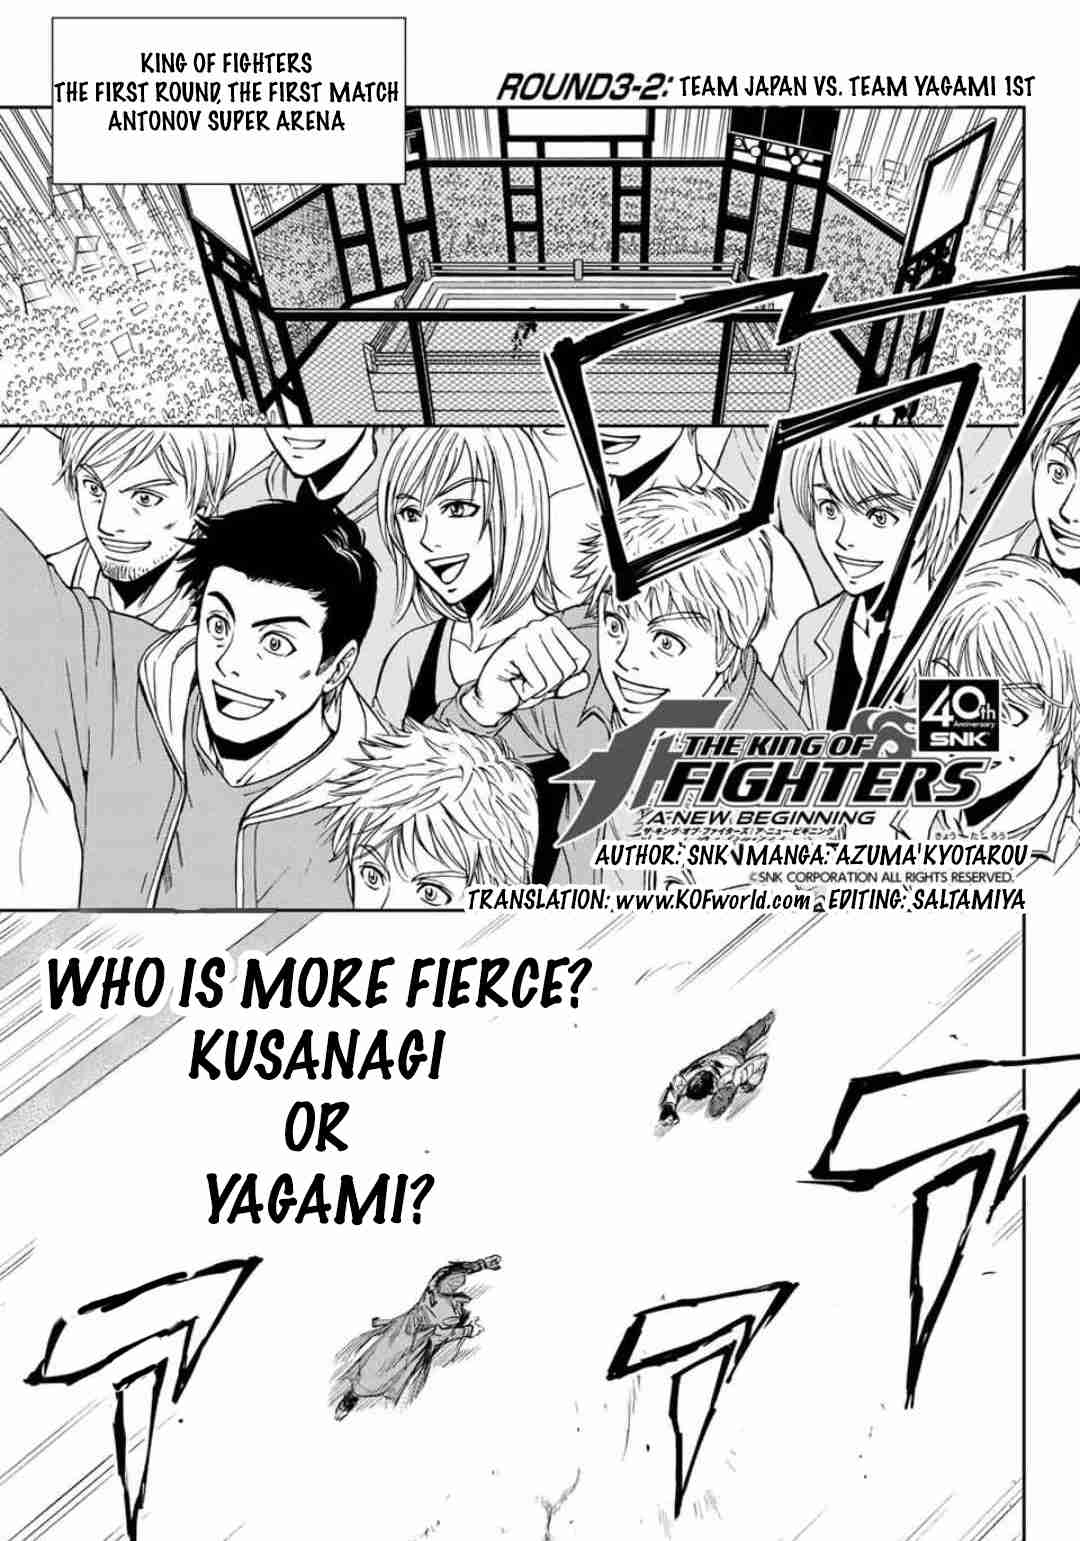 The King of Fighters: A New Beginning Vol. 1 Ch. 3.2 Team Japan vs Team Yagami 1st